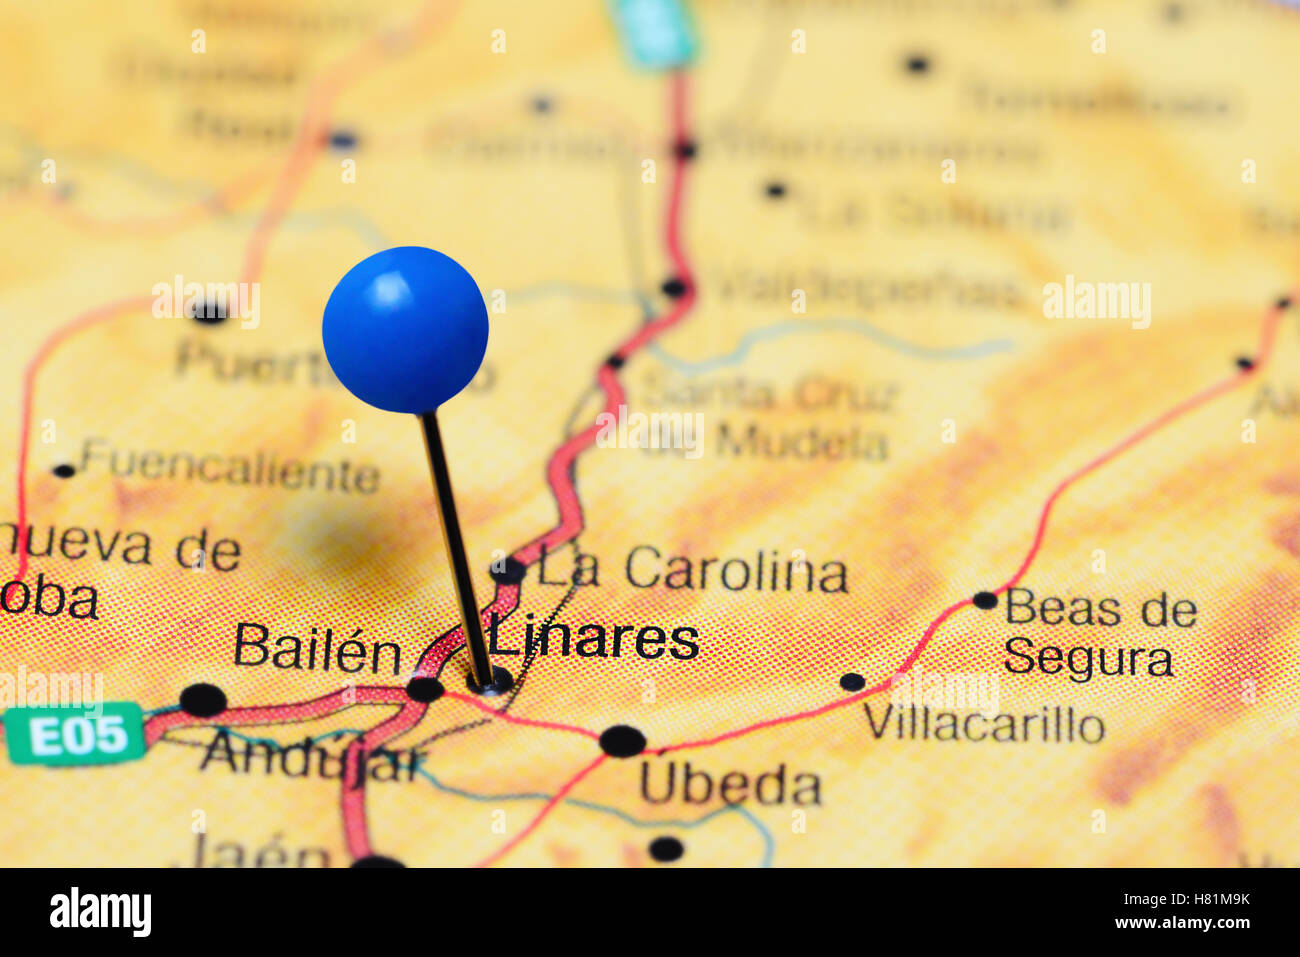 Linares pinned on a map of Spain Stock Photo